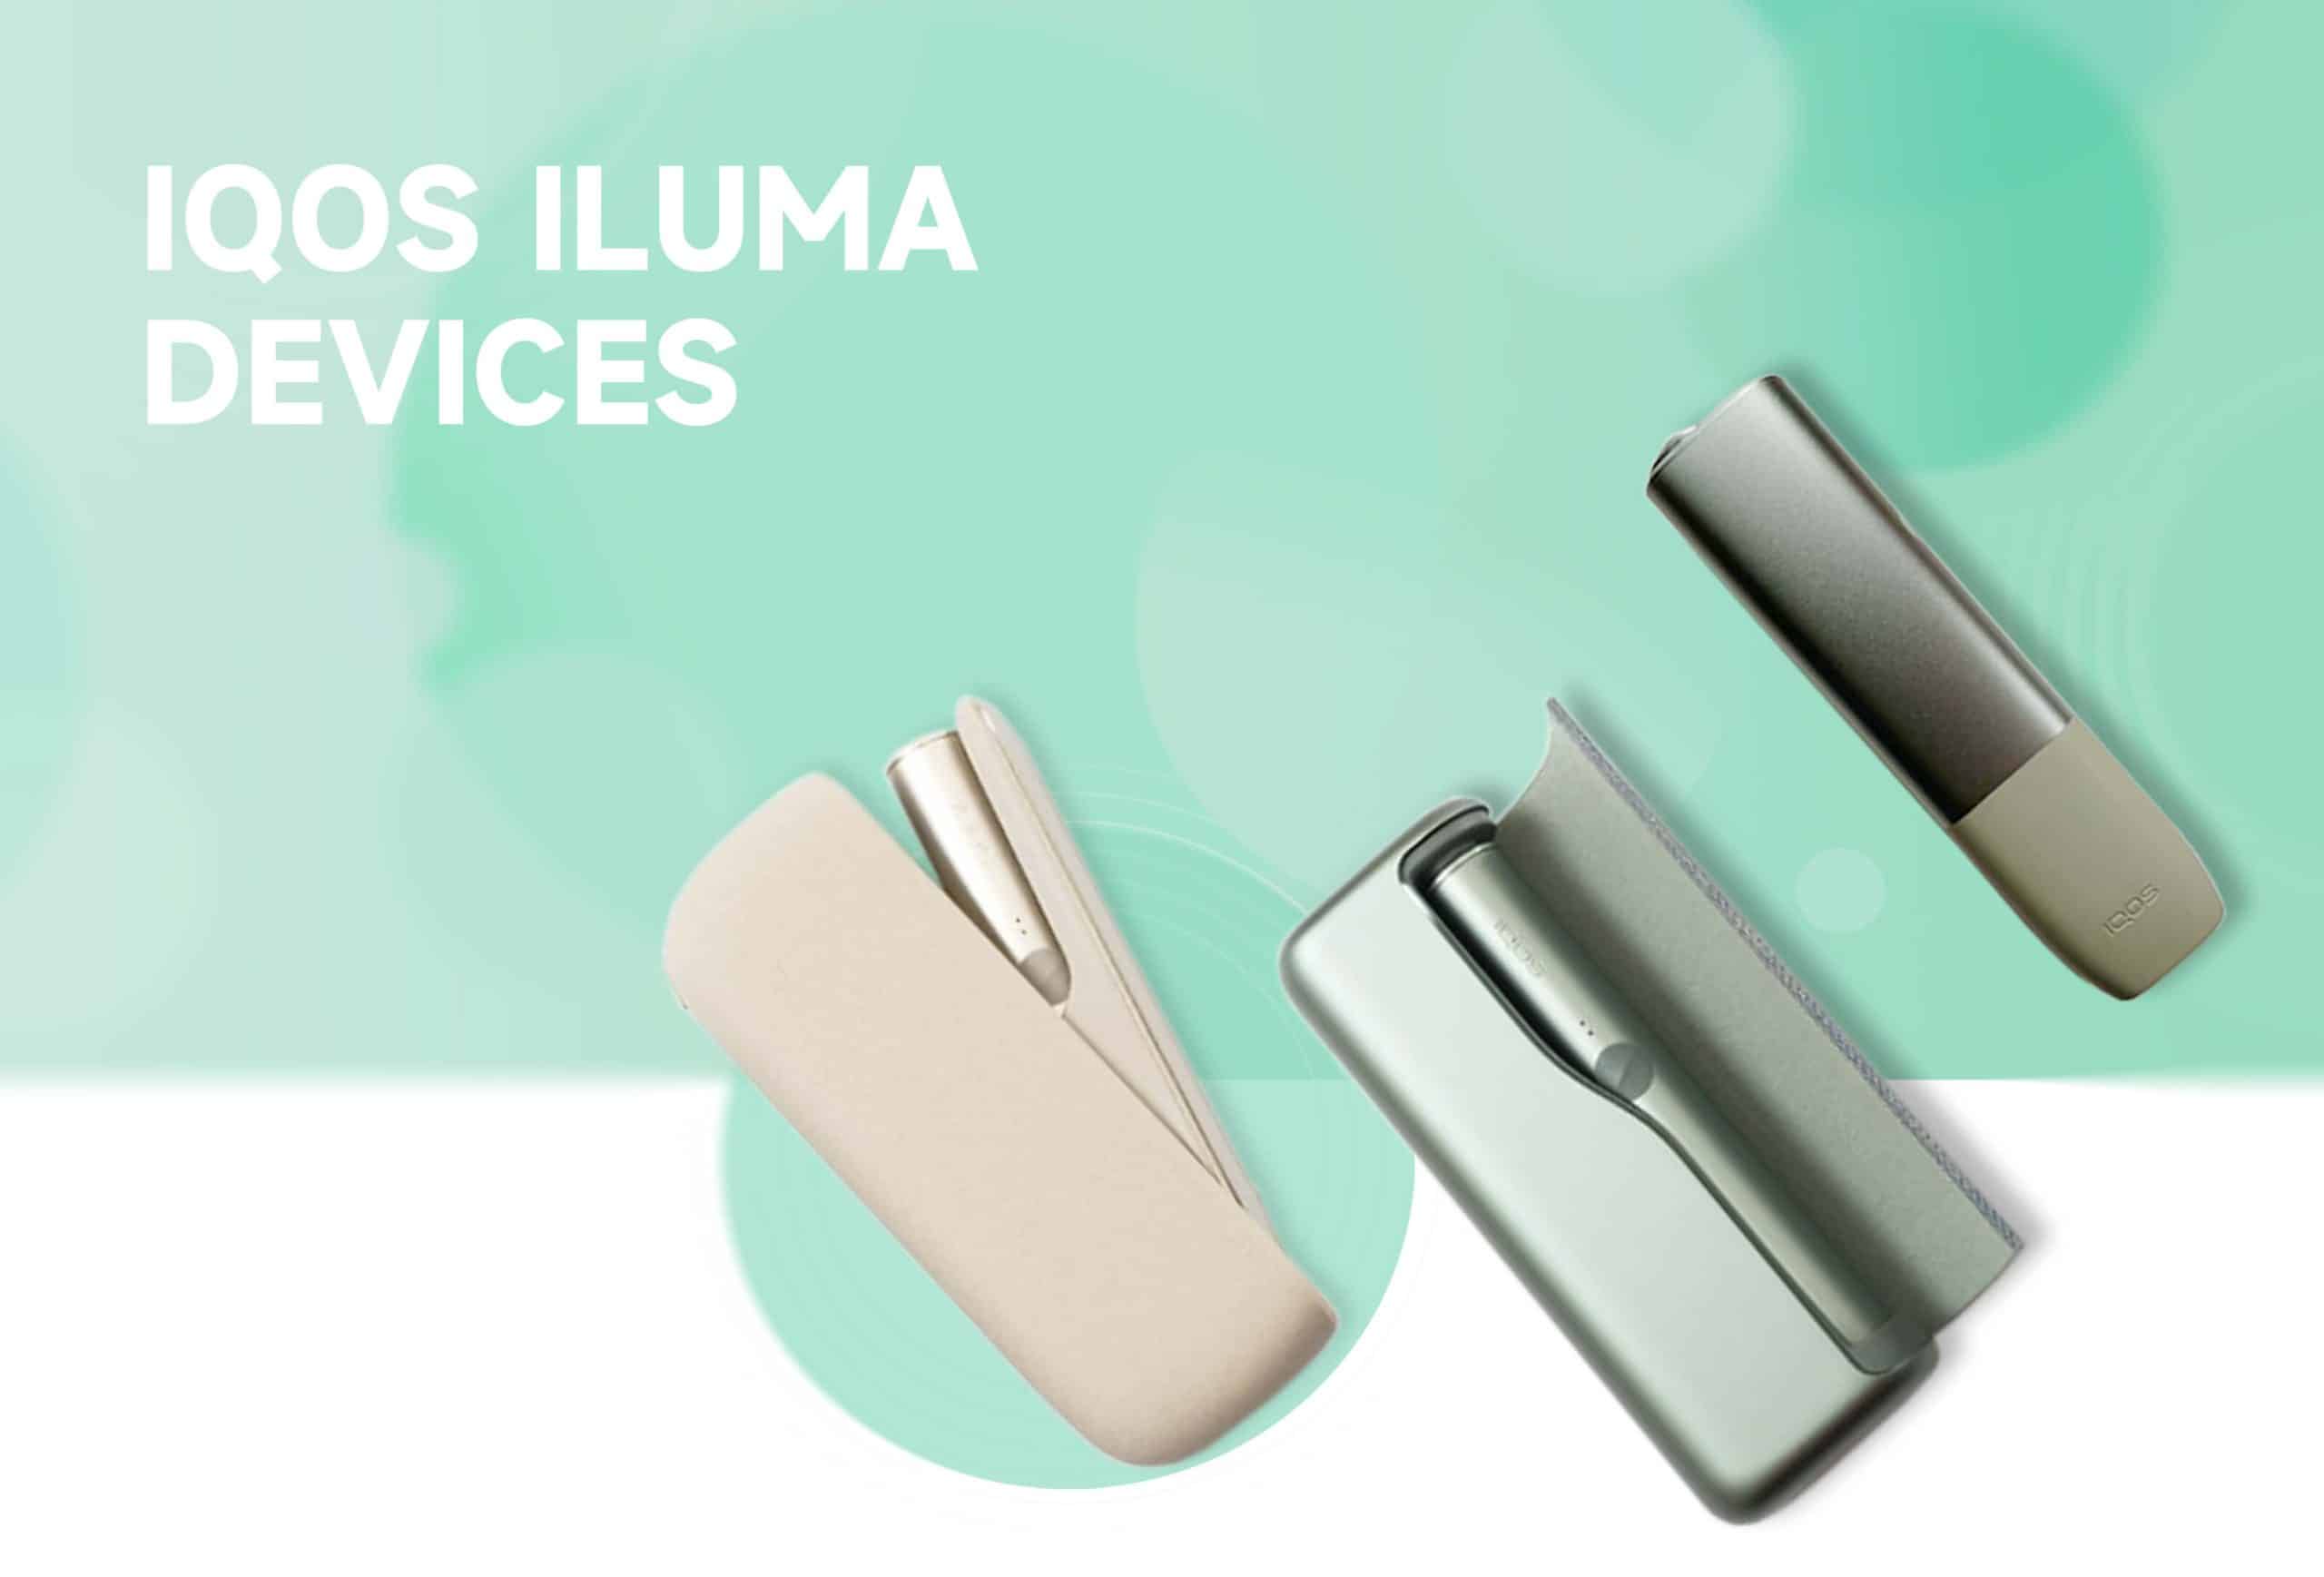 IQOS ILUMA ONE MOBILITY KIT THE WE EDITION - LIMITED EDITION